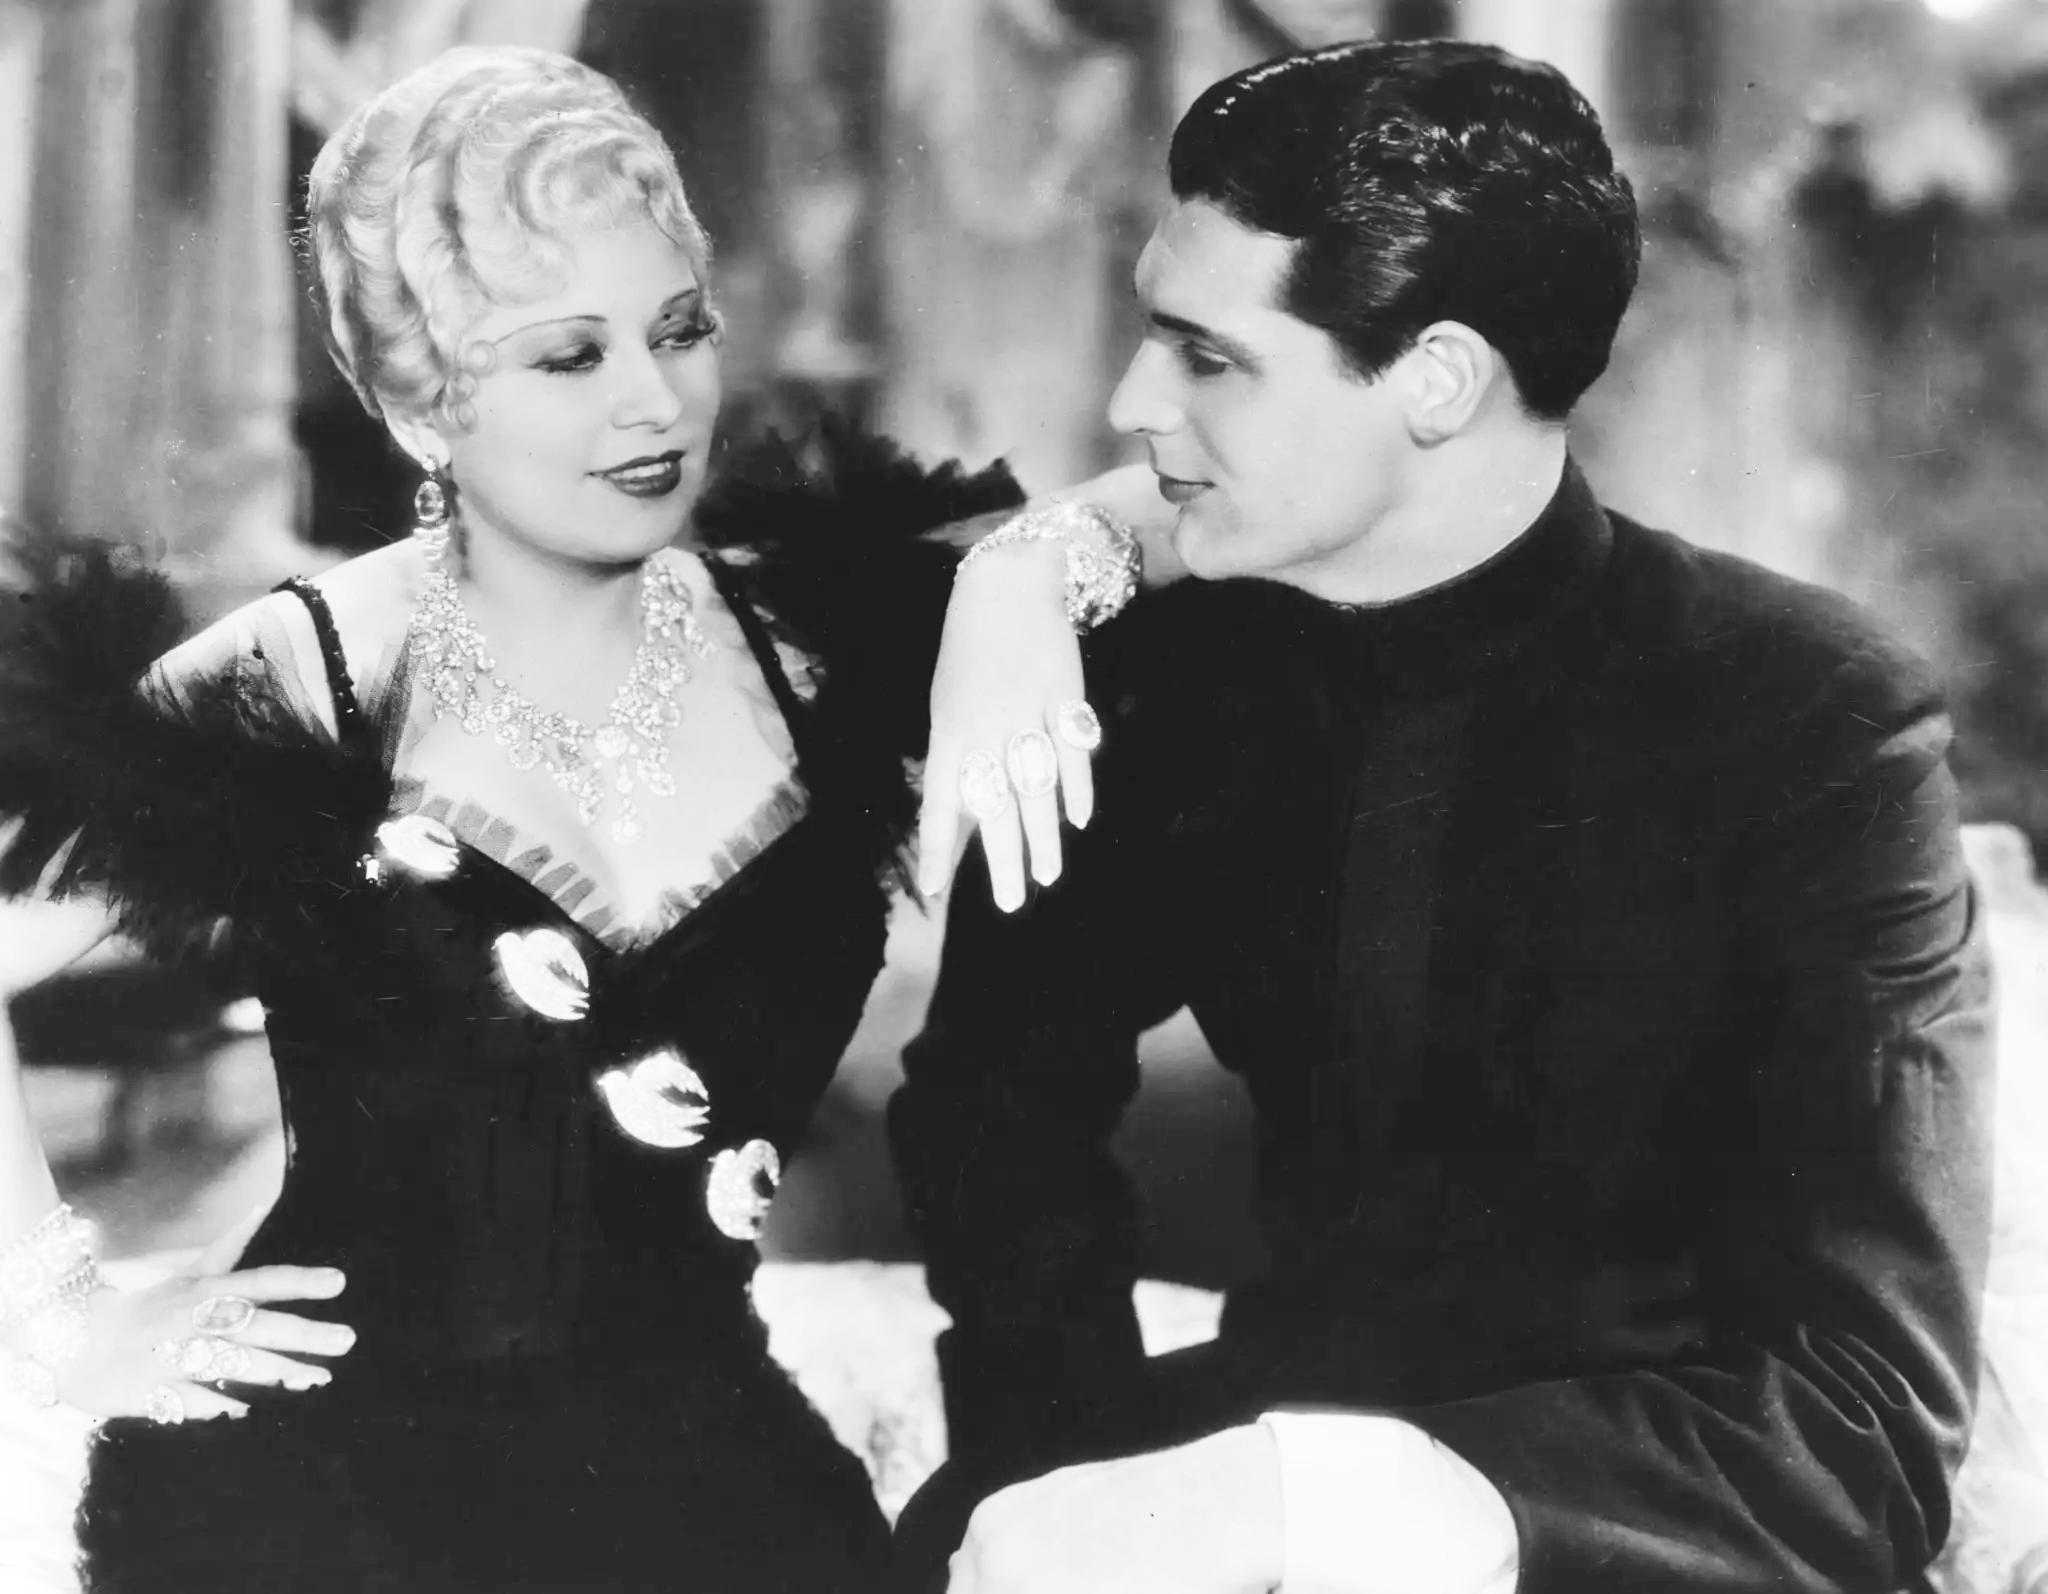 Saloon-keeper Mae West (1892 - 1980) falls for investigator Cary Grant (1904 - 1986) in the Paramount production 'She Done Him Wrong', written by West herself and directed by Lowell Sherman. 1933